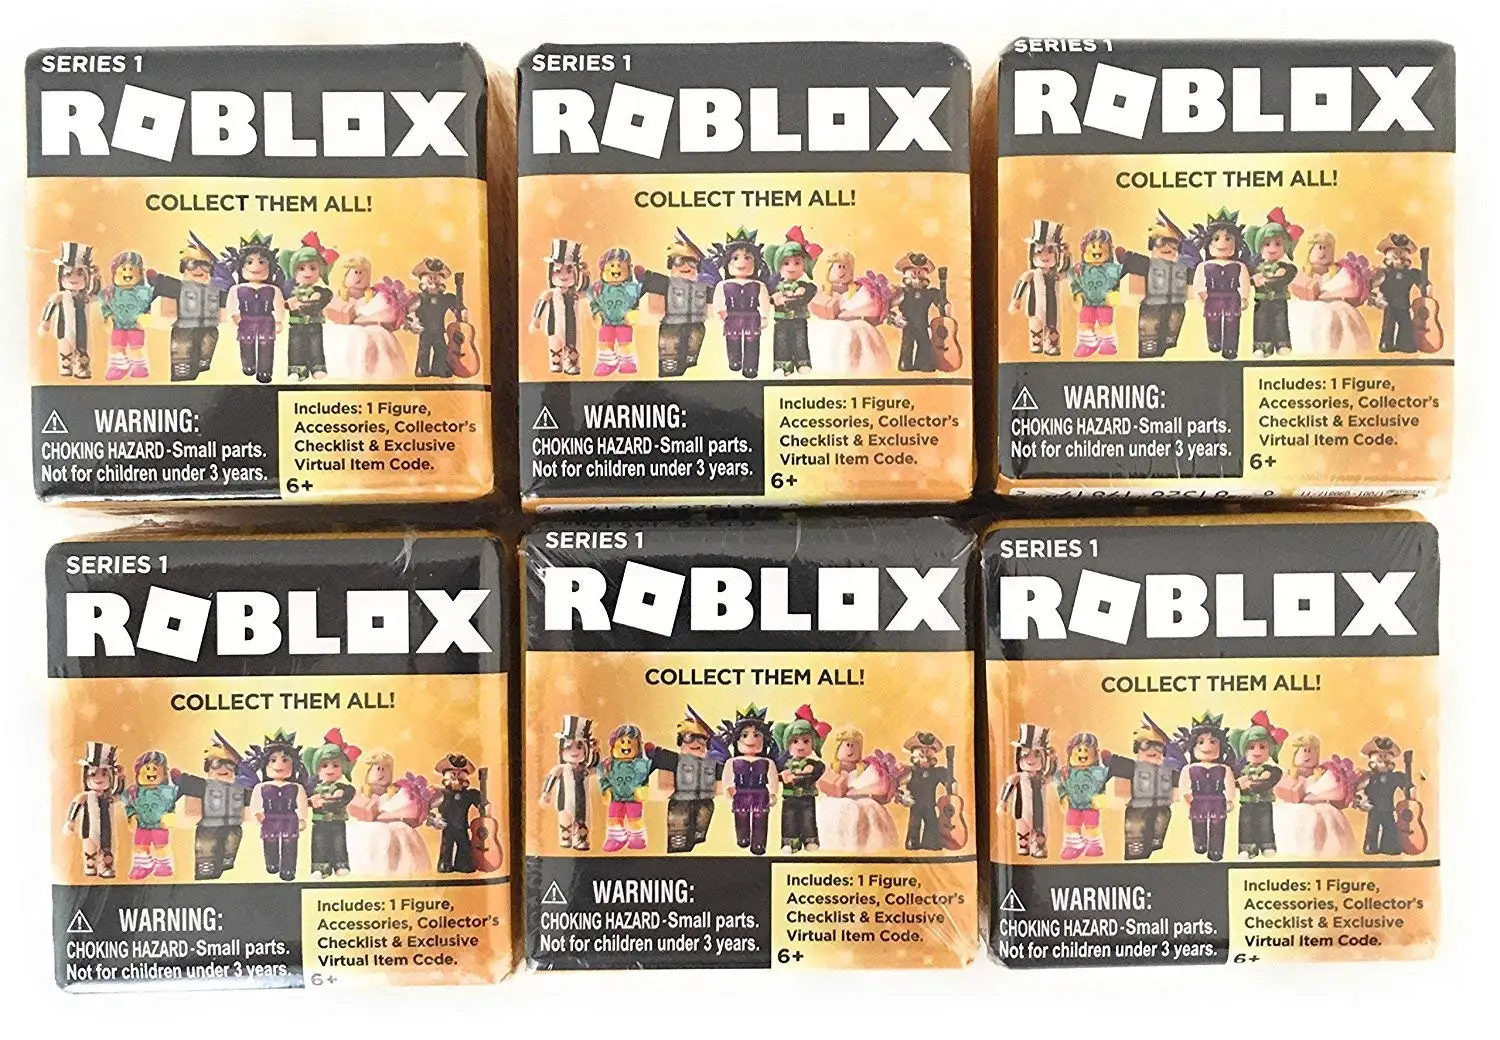 Cheap Roblox Battlefield Hacks Find Roblox Battlefield - new roblox series 2 defaultio blind box mystery action figures kids toys no code